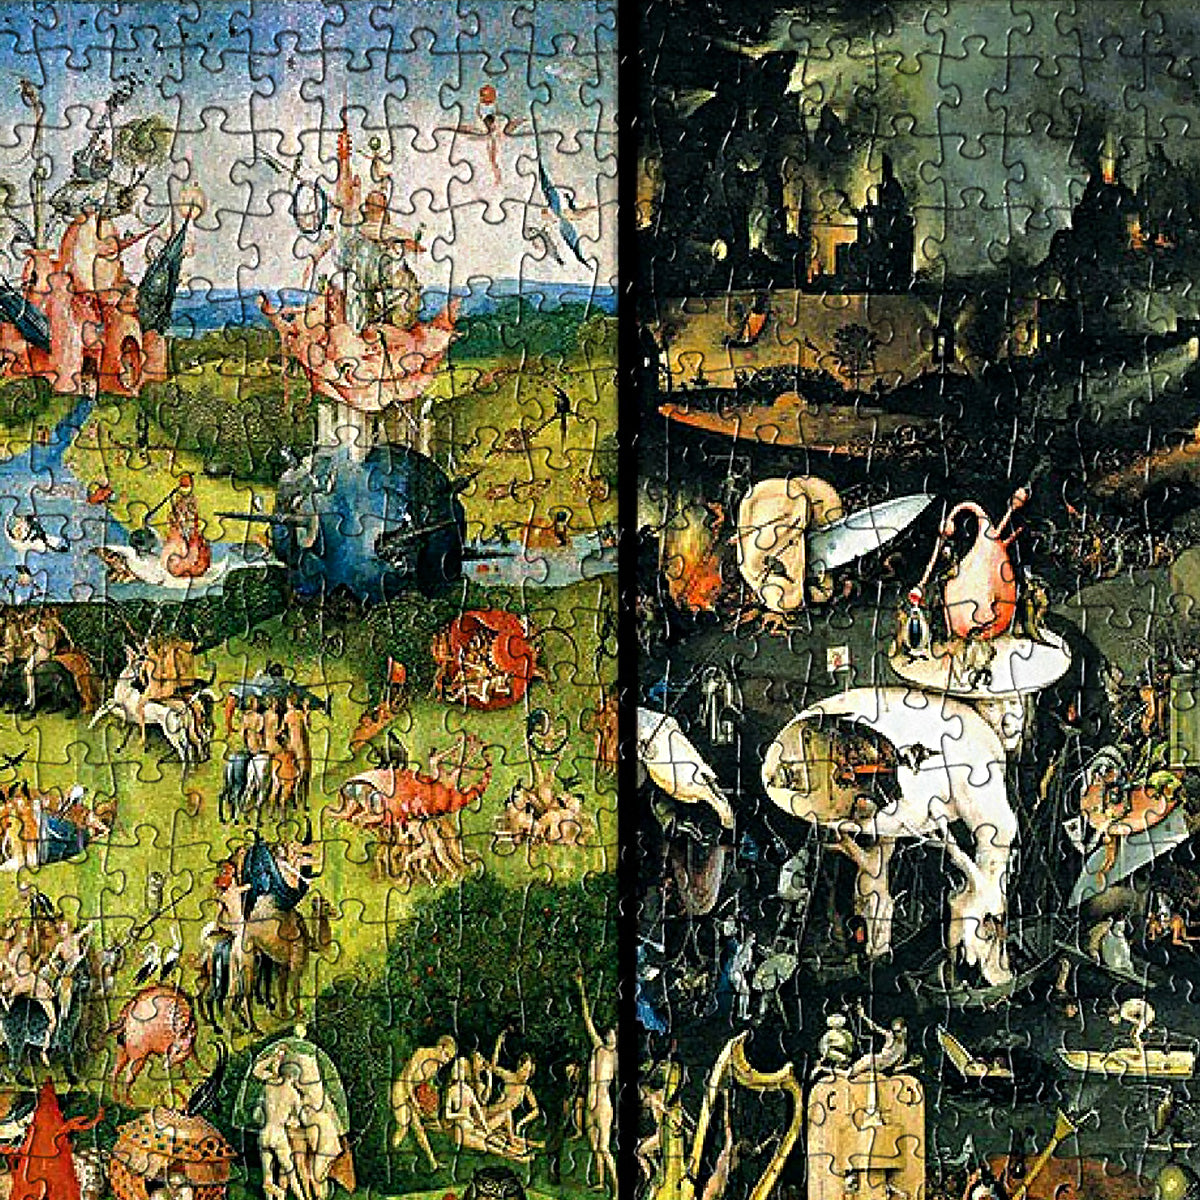 Add some flair to your interior design with this Eurographics jigsaw puzzle of Hieronymus Bosch's iconic painting, The Garden of Earthly Delights.